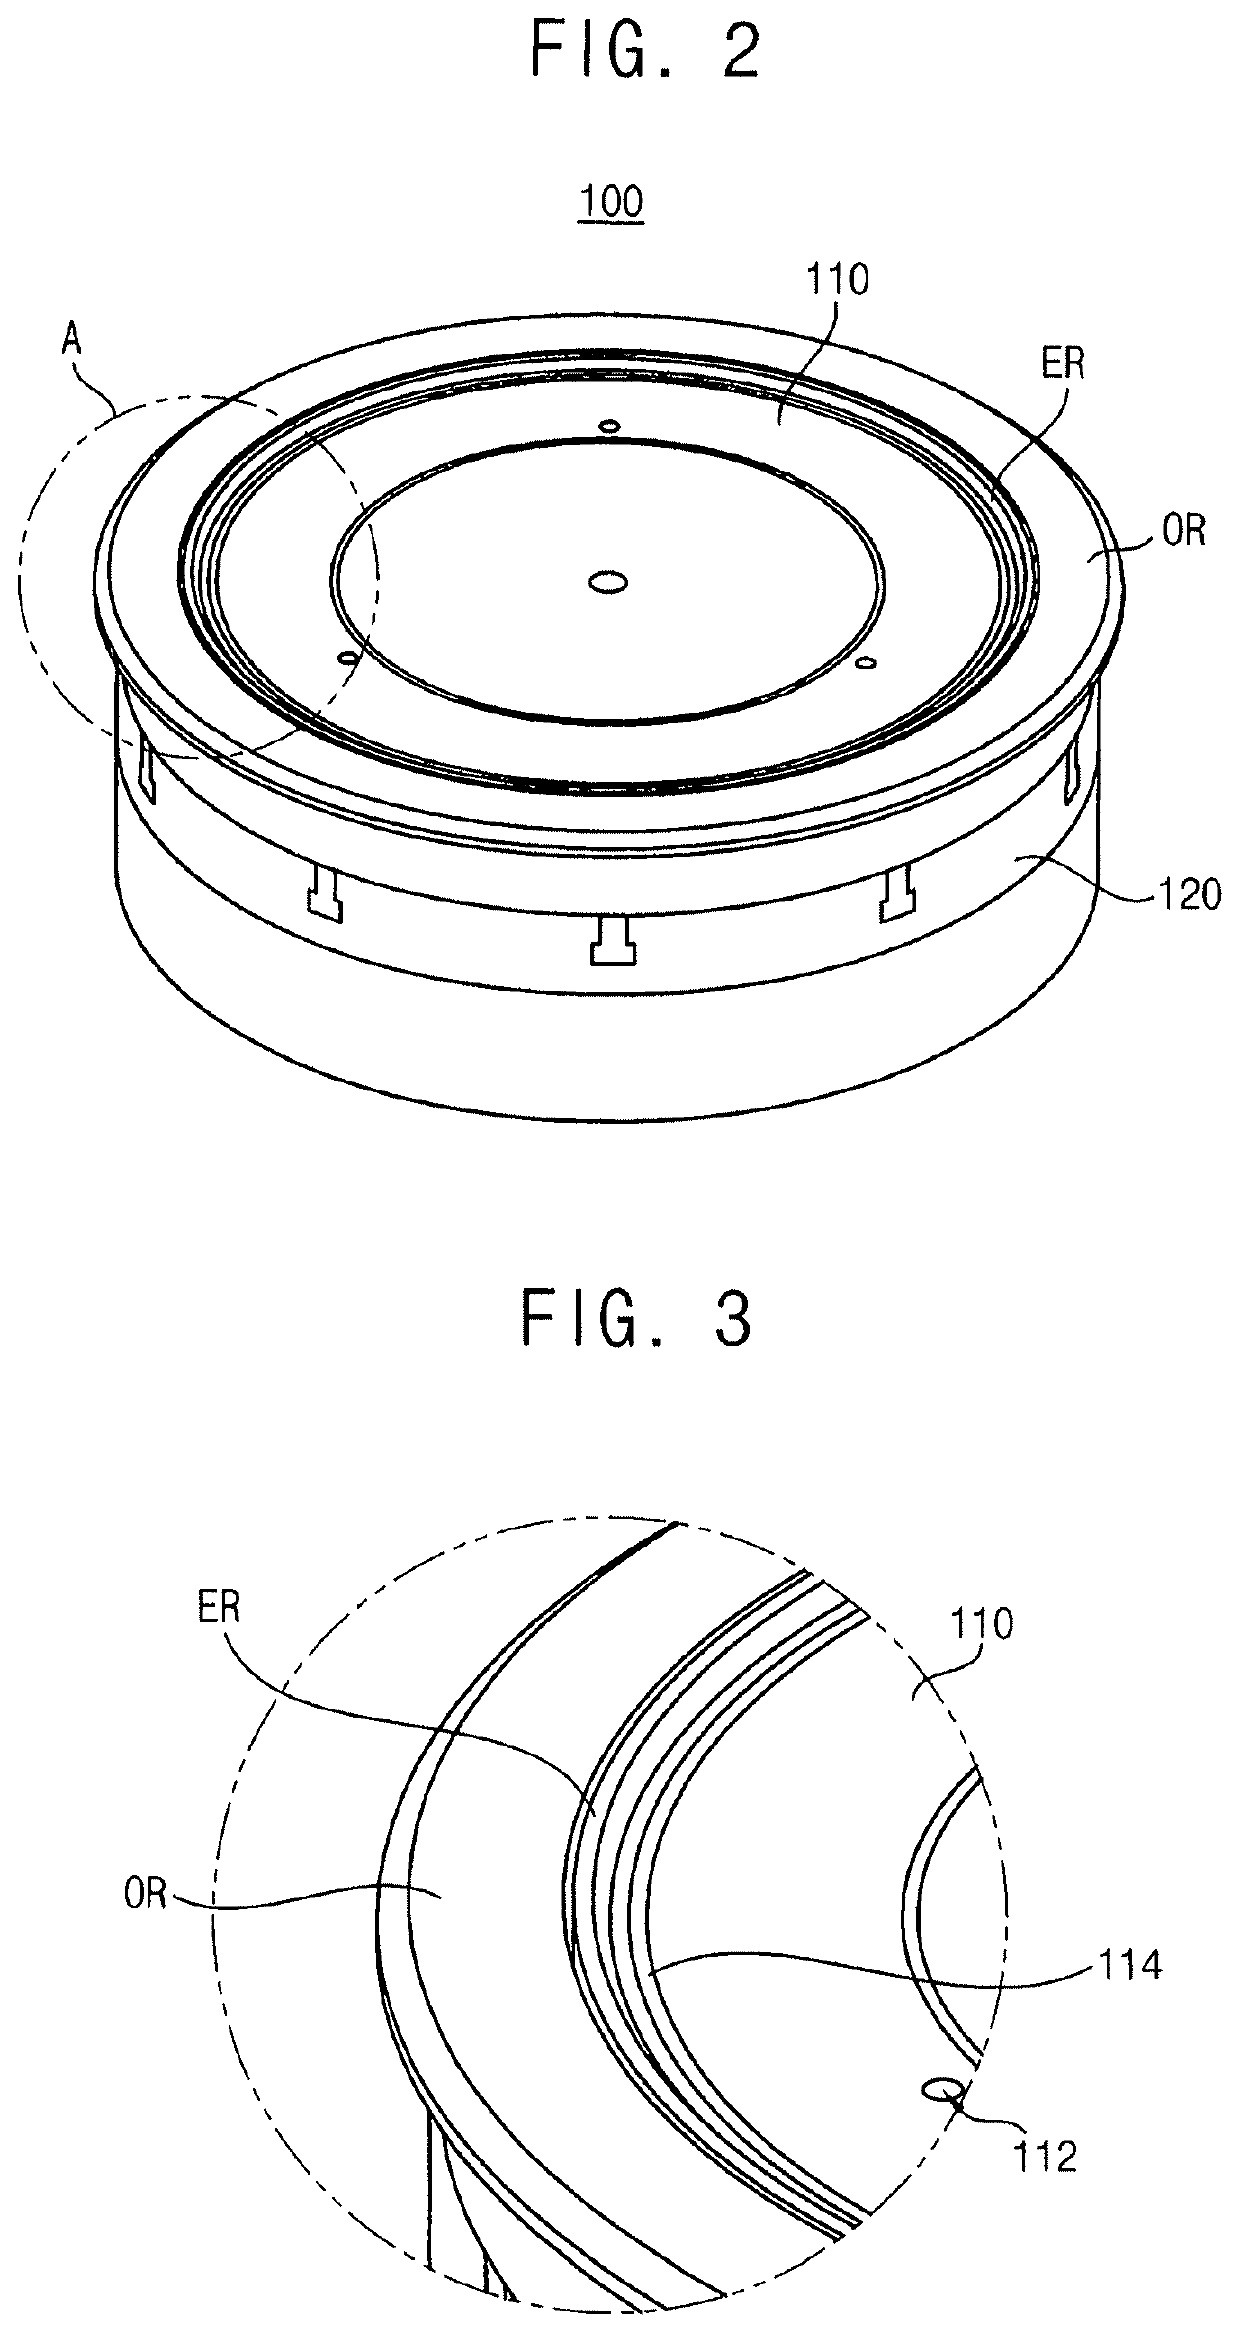 Apparatus and methods for edge ring replacement, inspection and alignment using image sensors